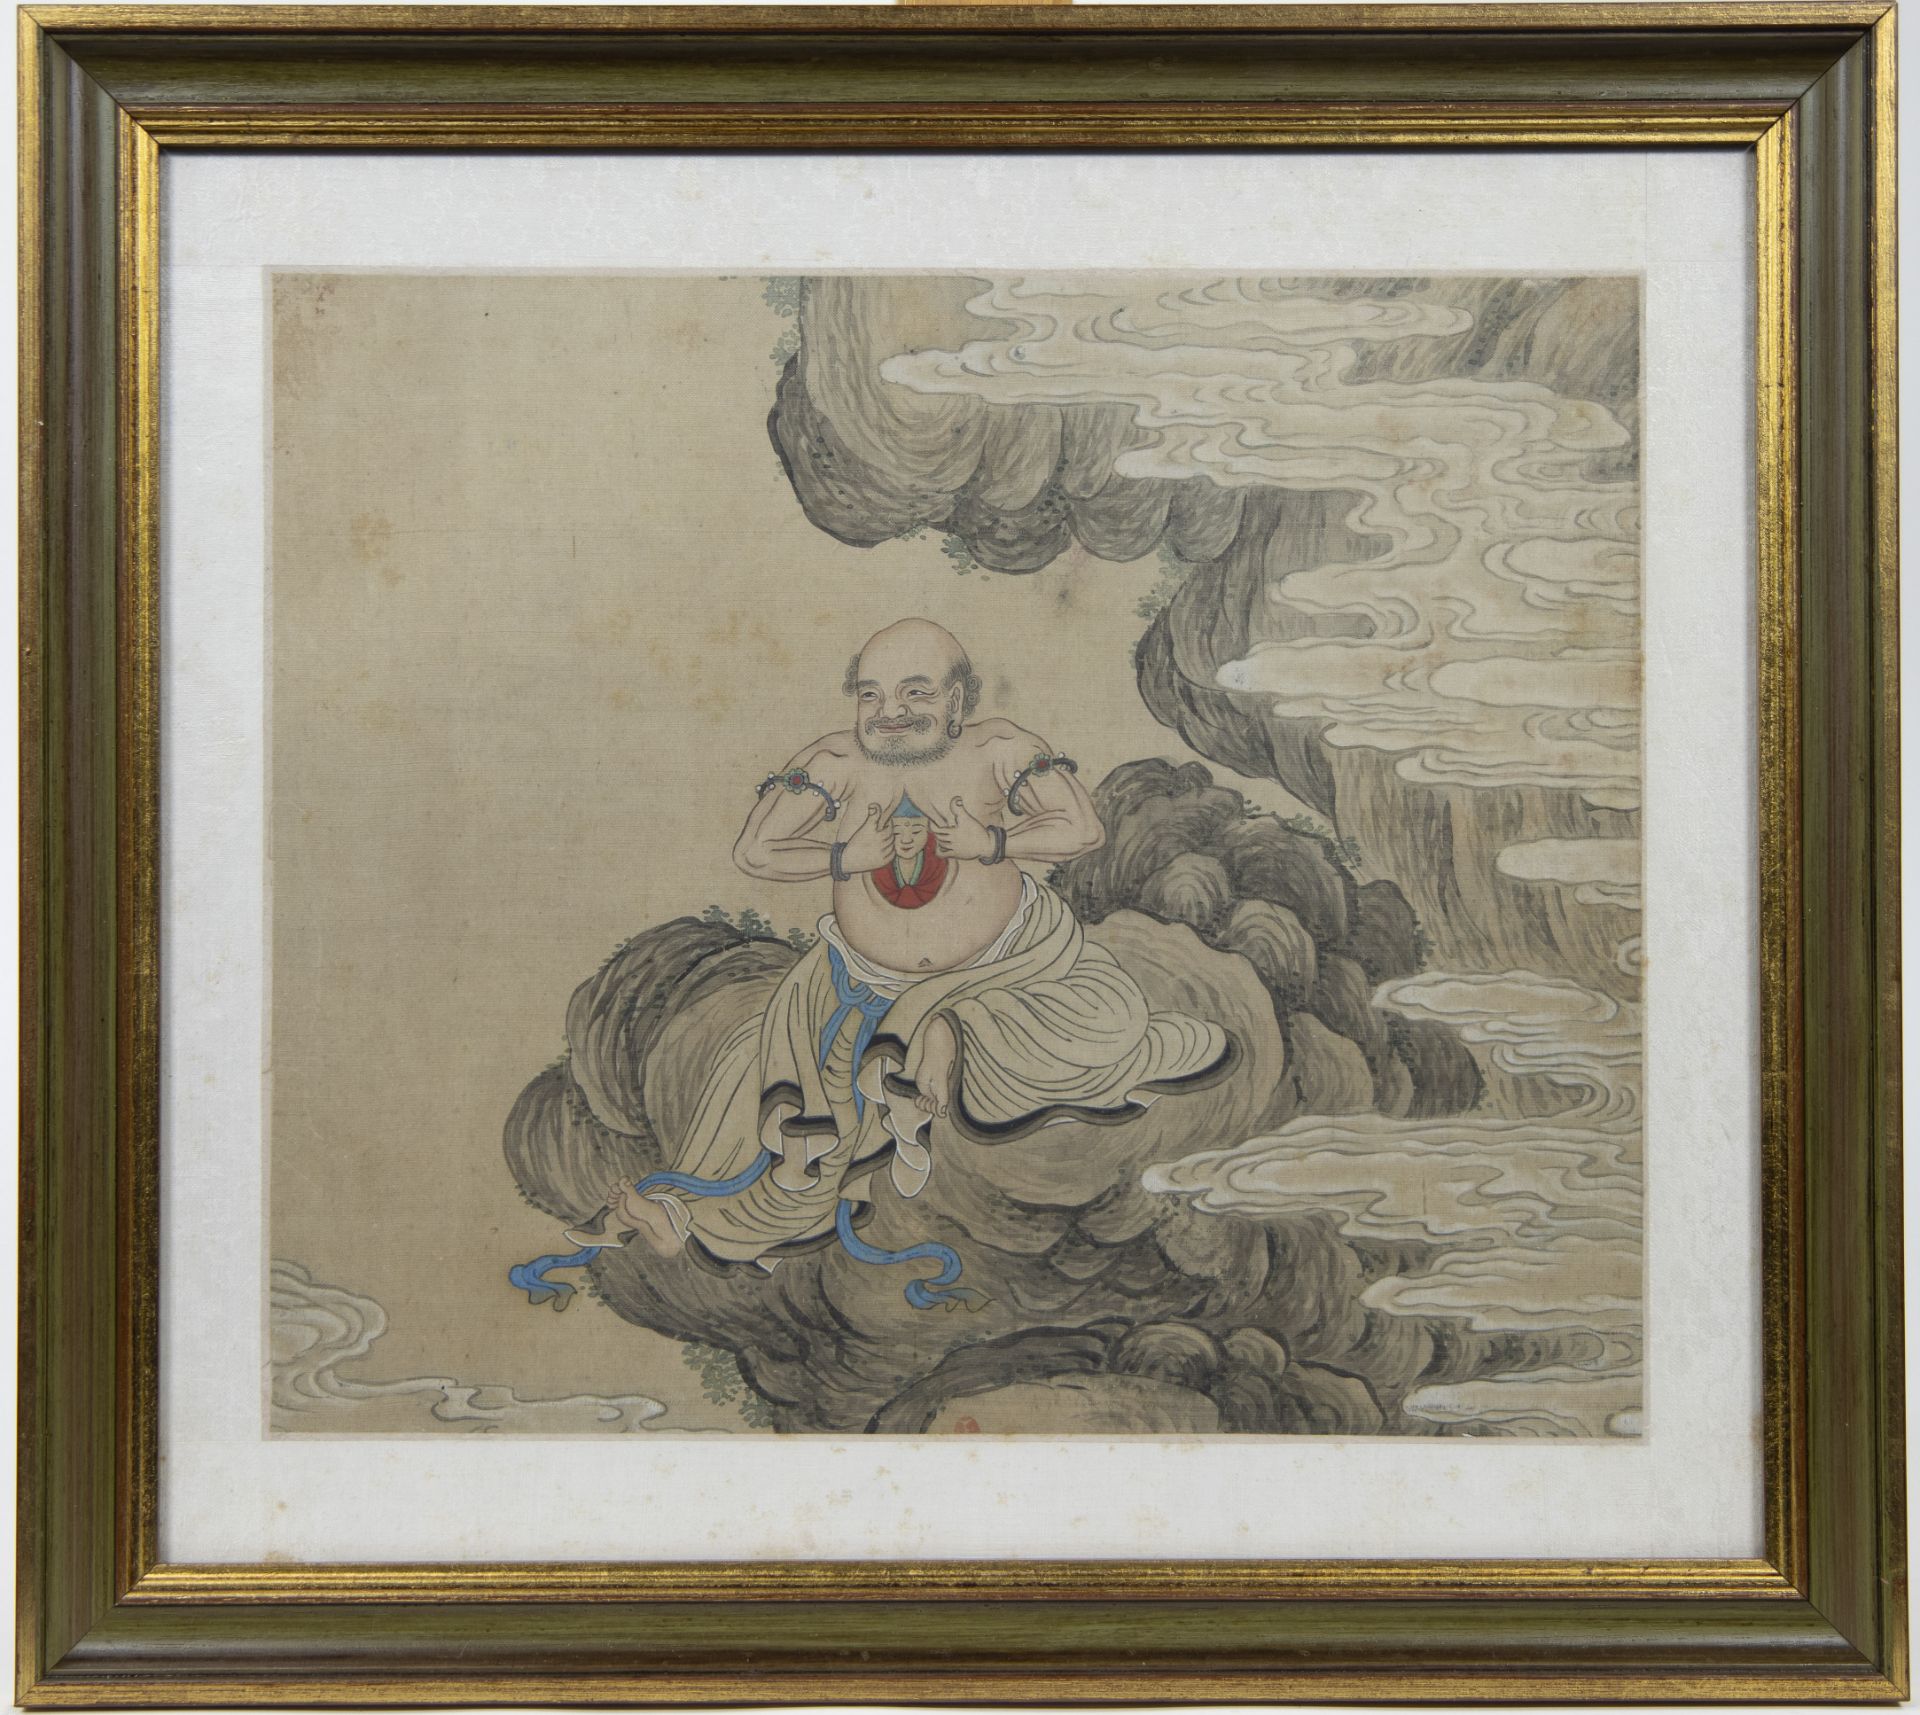 Set of 13 Chinese coloured drawings on silk, 19th century, some are signed - Image 5 of 17